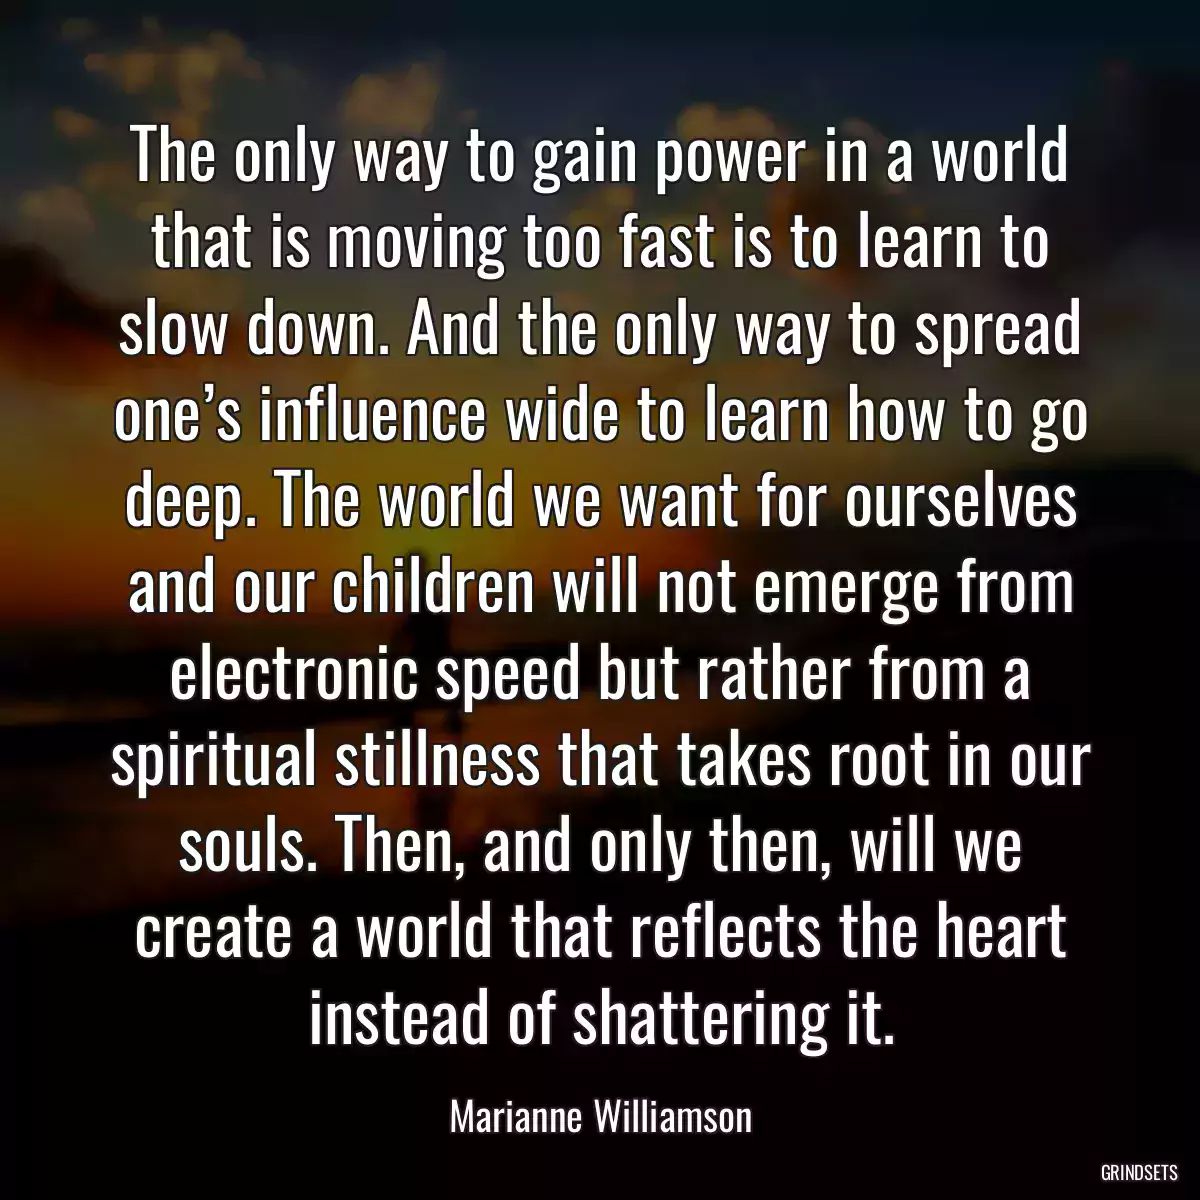 The only way to gain power in a world that is moving too fast is to learn to slow down. And the only way to spread one’s influence wide to learn how to go deep. The world we want for ourselves and our children will not emerge from electronic speed but rather from a spiritual stillness that takes root in our souls. Then, and only then, will we create a world that reflects the heart instead of shattering it.